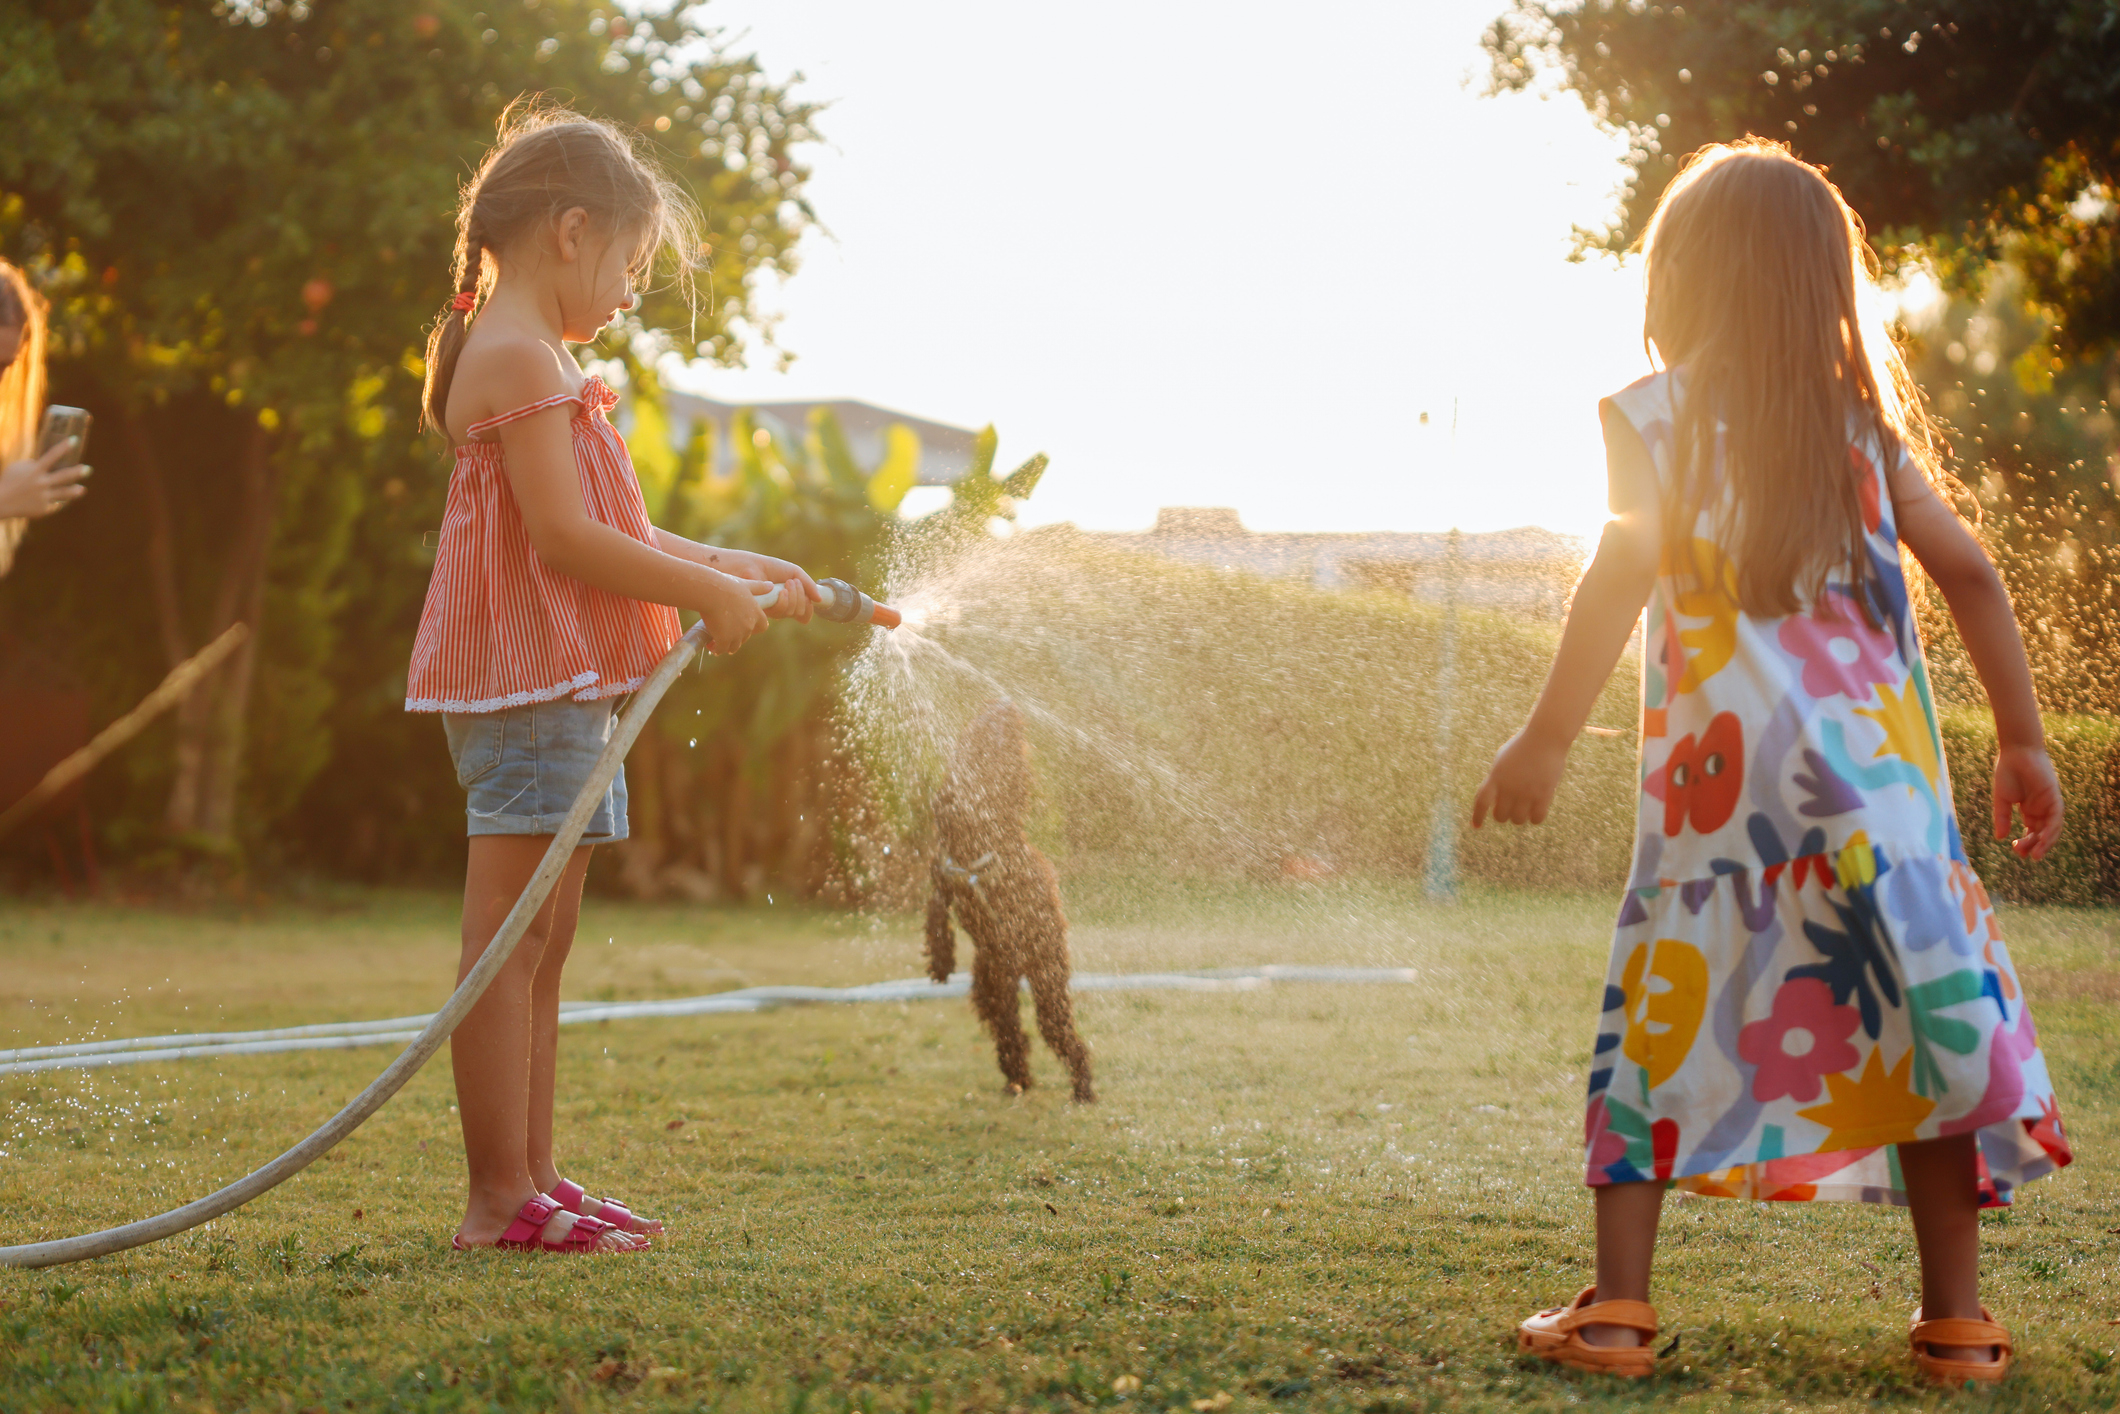 Two children play with a hose outdoors; one sprays water while the other watches